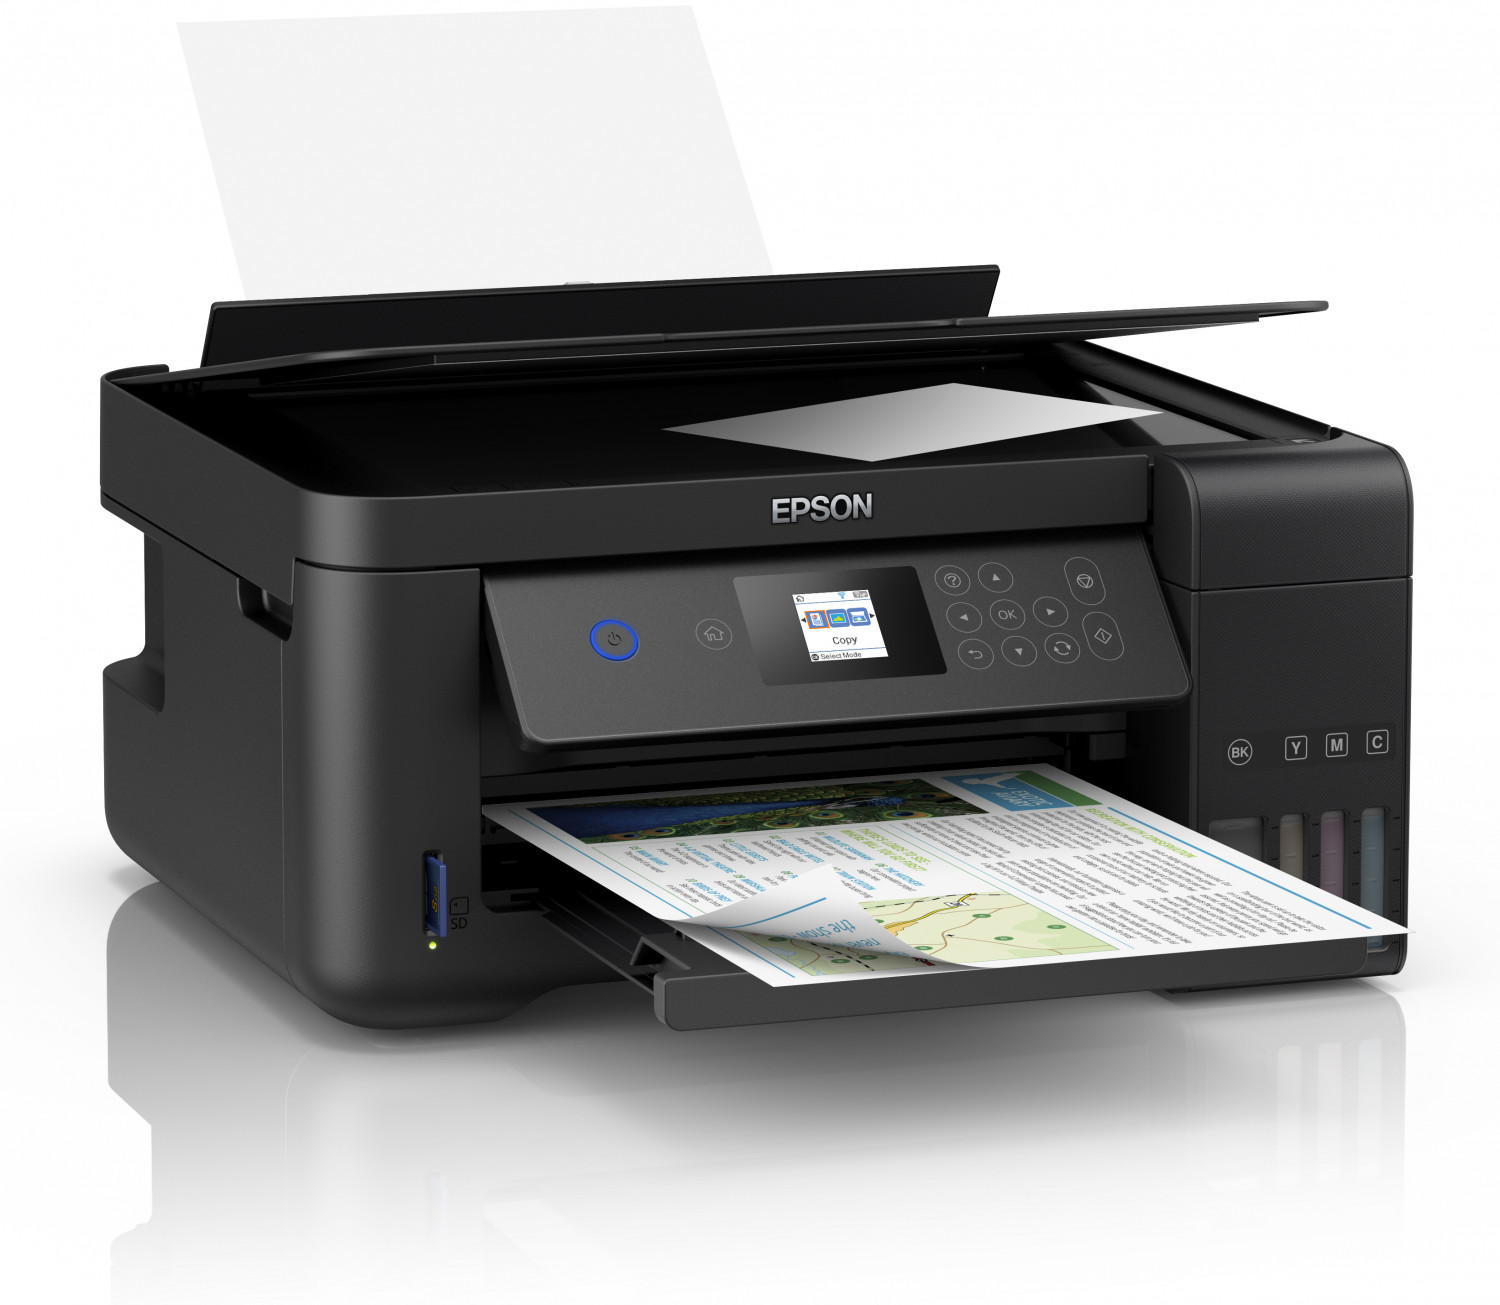 Printer Epson L4150/L4160 Ubuntu How to Download and Install - Featured